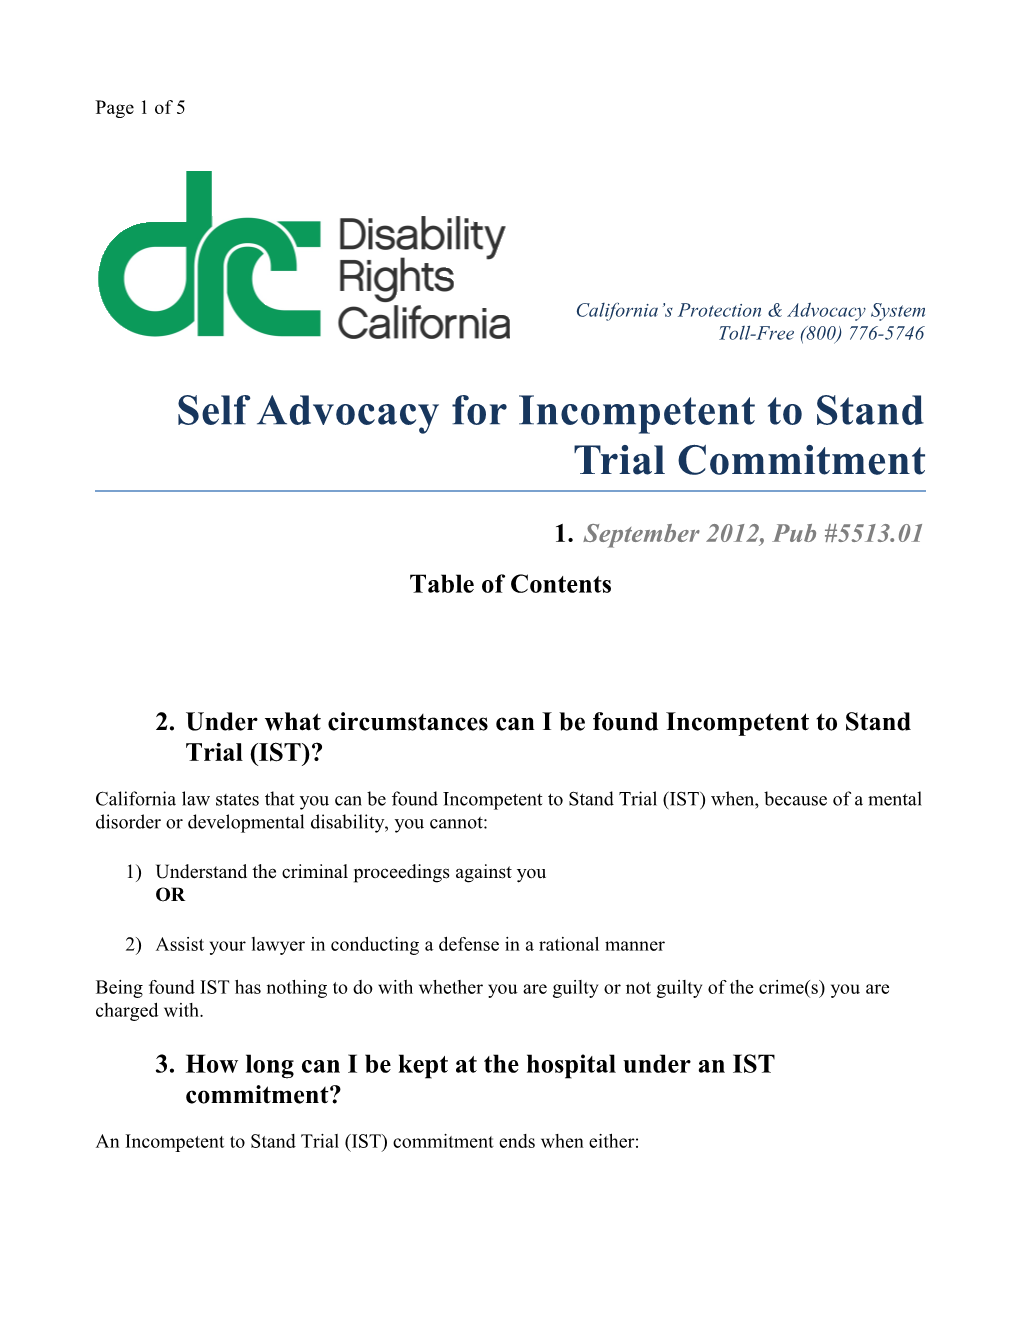 Self Advocacy for Incompetent to Stand Trial Commitment